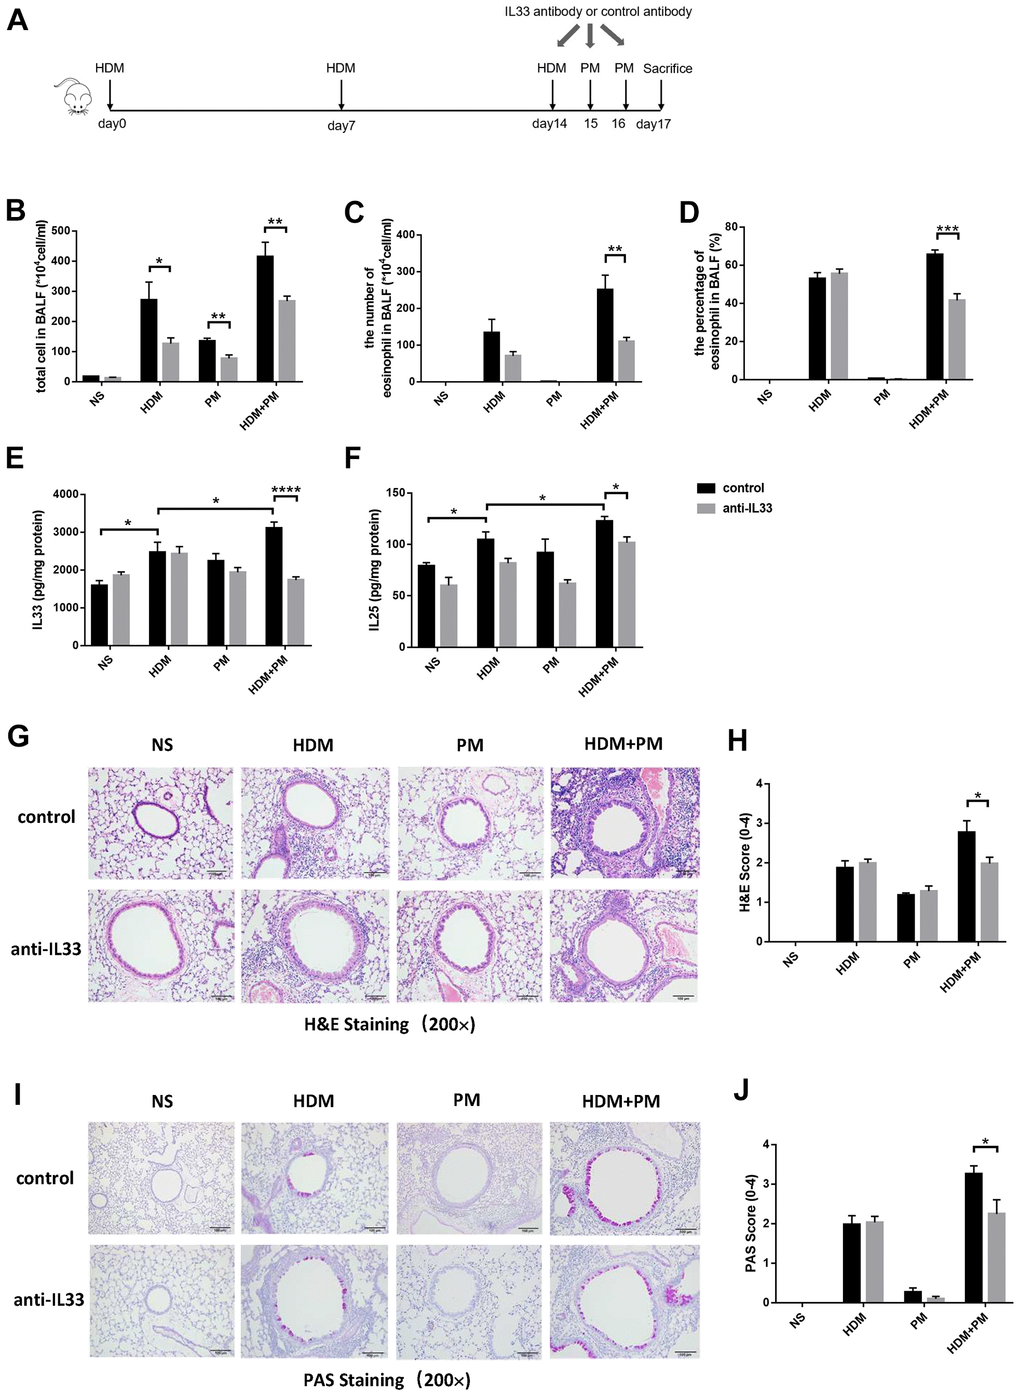 IL-33 antibody alleviated the aggravation of airway inflammation caused by PM exposure in the HDM-induced allergic mice. Male mice in the control and experimental groups were injected intraperitoneally with IL-33 antibody or control antibody, respectively (N = 8 for each group). Protocol for the IL-33 antibody or control antibody intervention (A). Total inflammatory cells, eosinophil proportion, and eosinophil number were analyzed (B–D). Protein levels of IL-33 (E) and IL-25 (F) in the lung tissues were measured using ELISA. Representative images of lung tissues stained with H&E (G) and PAS (I) were showed under the microscope (10 × 20 magnification). Inflammatory score (H) and mucus production (J) with semi-quantification (score: 0–4) were analyzed under the microscope (10 × 20 magnification). Data were presented as means ± SEM (*, P 